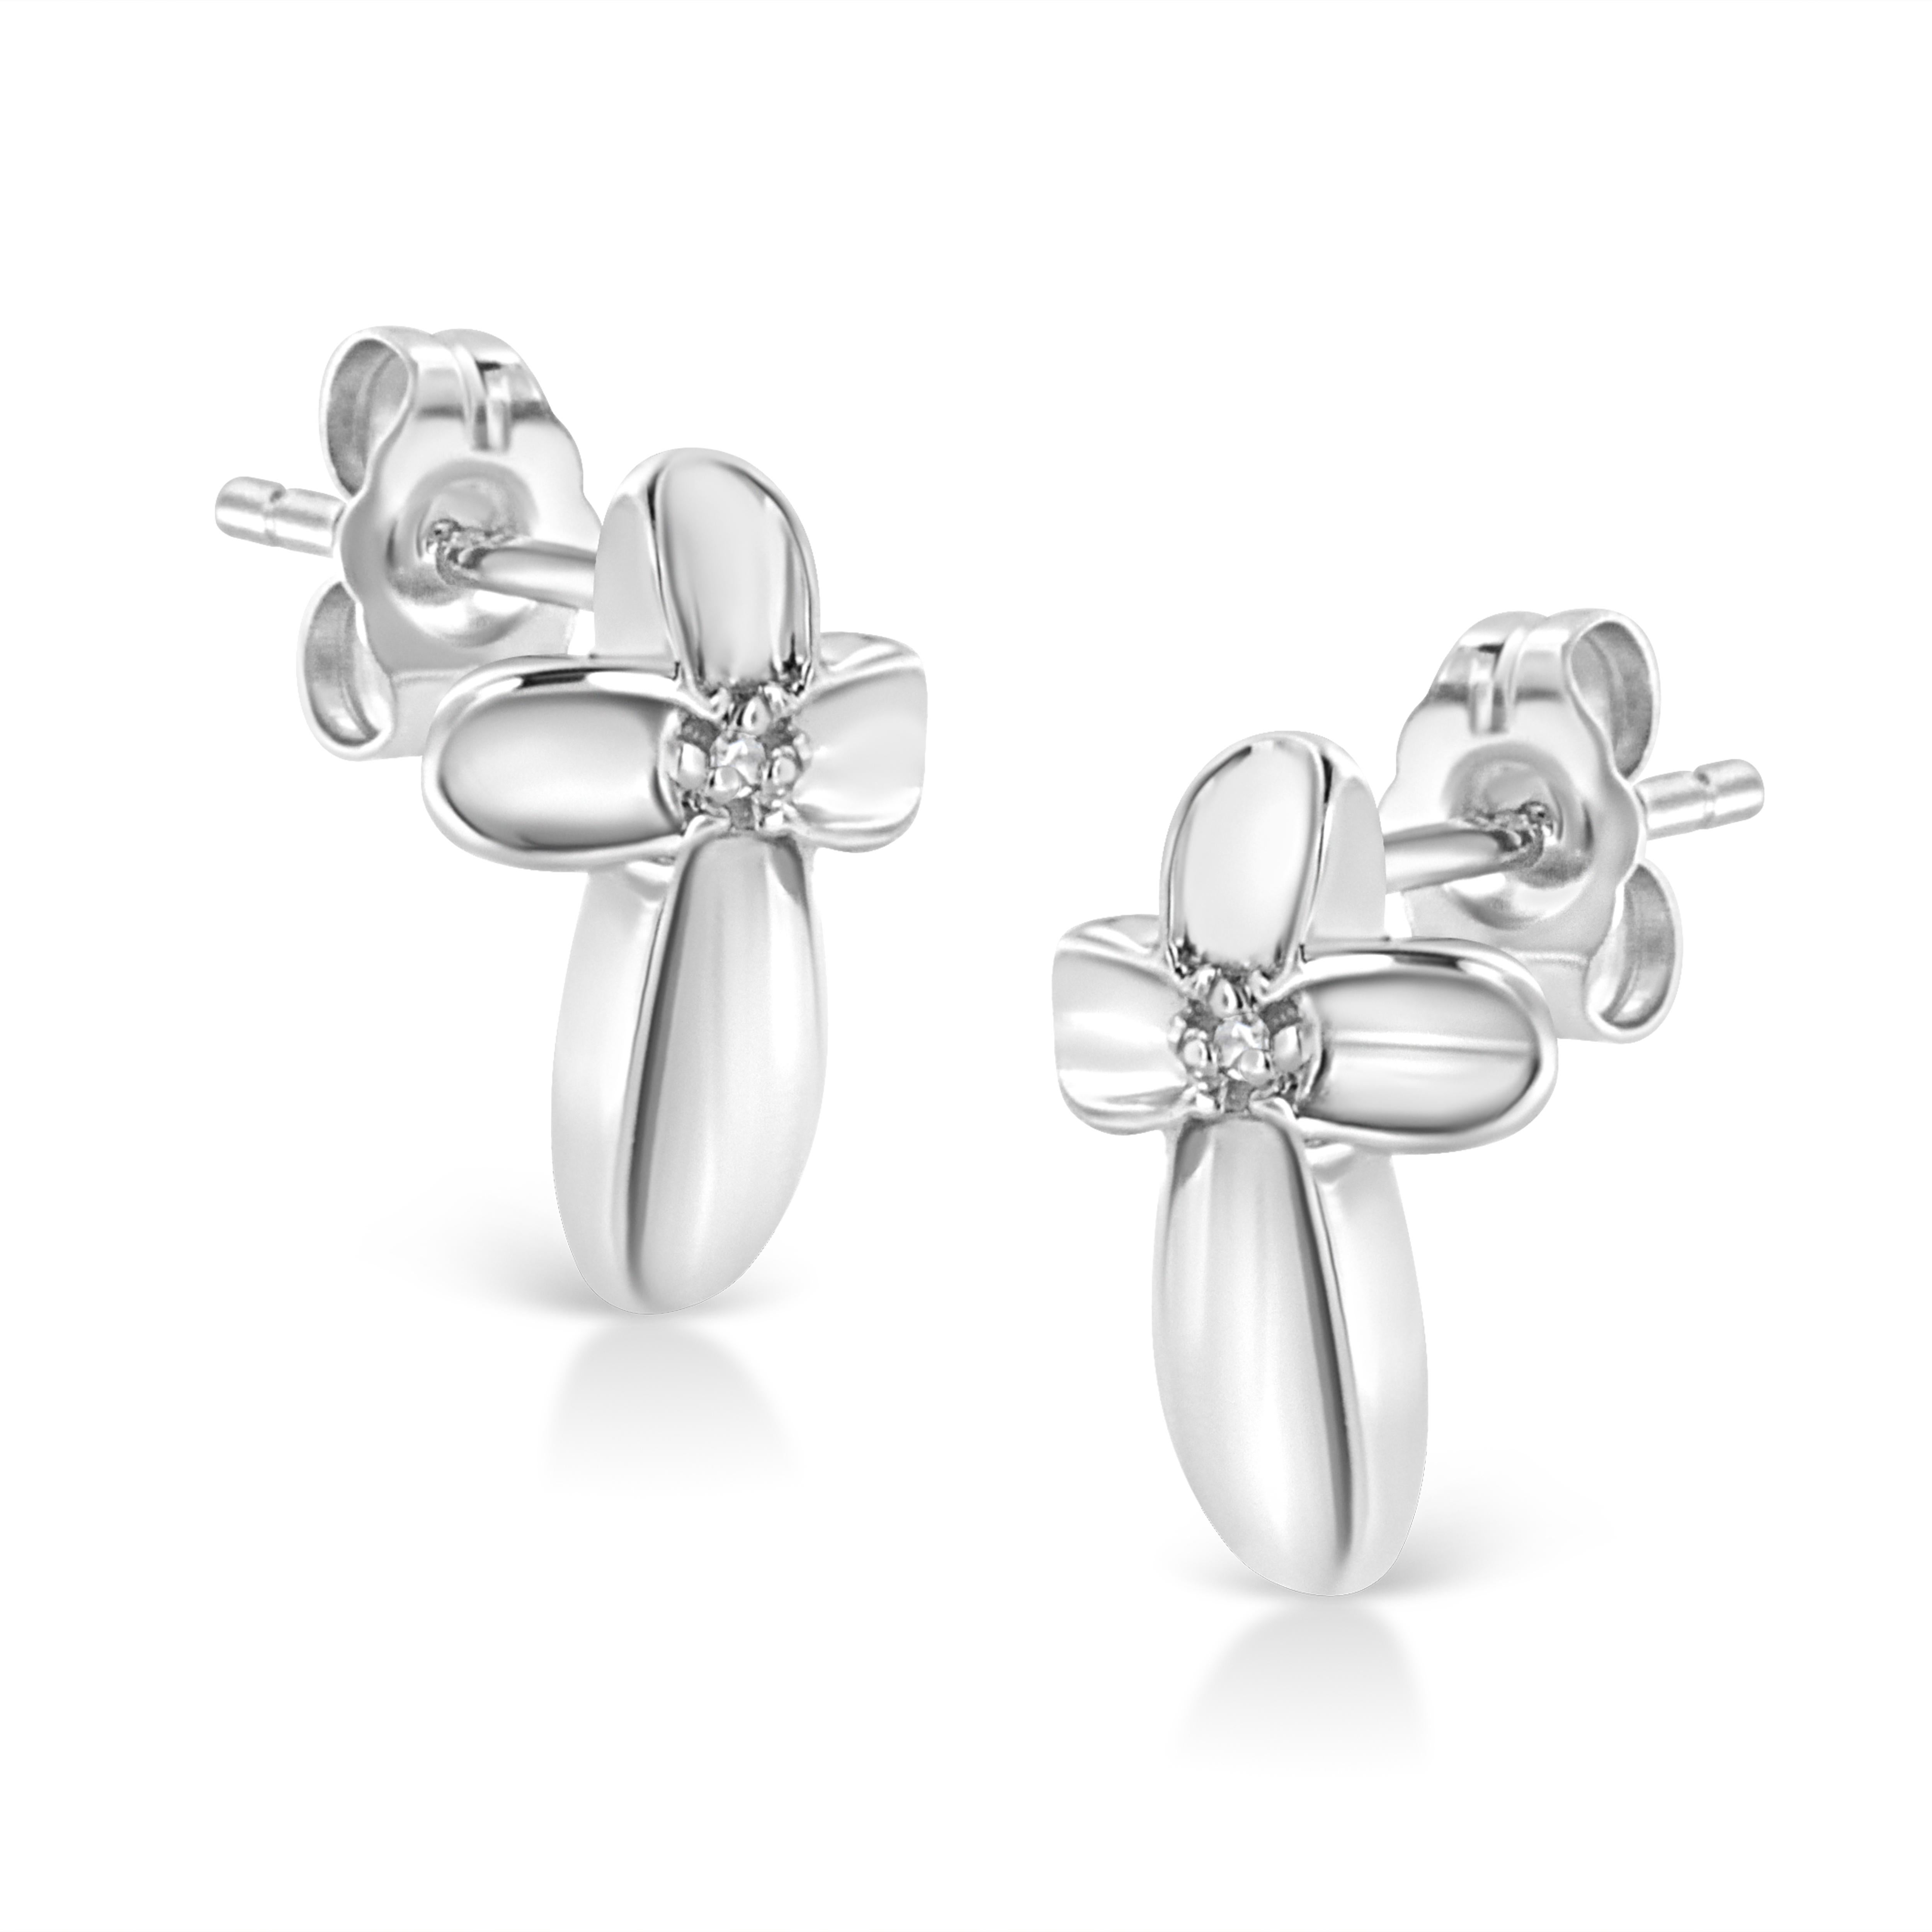 Symbolize your power expression of religious devotion with these magnificent diamond cross earrings. Fashioned in sterling silver, these ravishing earrings are embellished with two radiant prong set single cut diamond and closed with secure clasp.